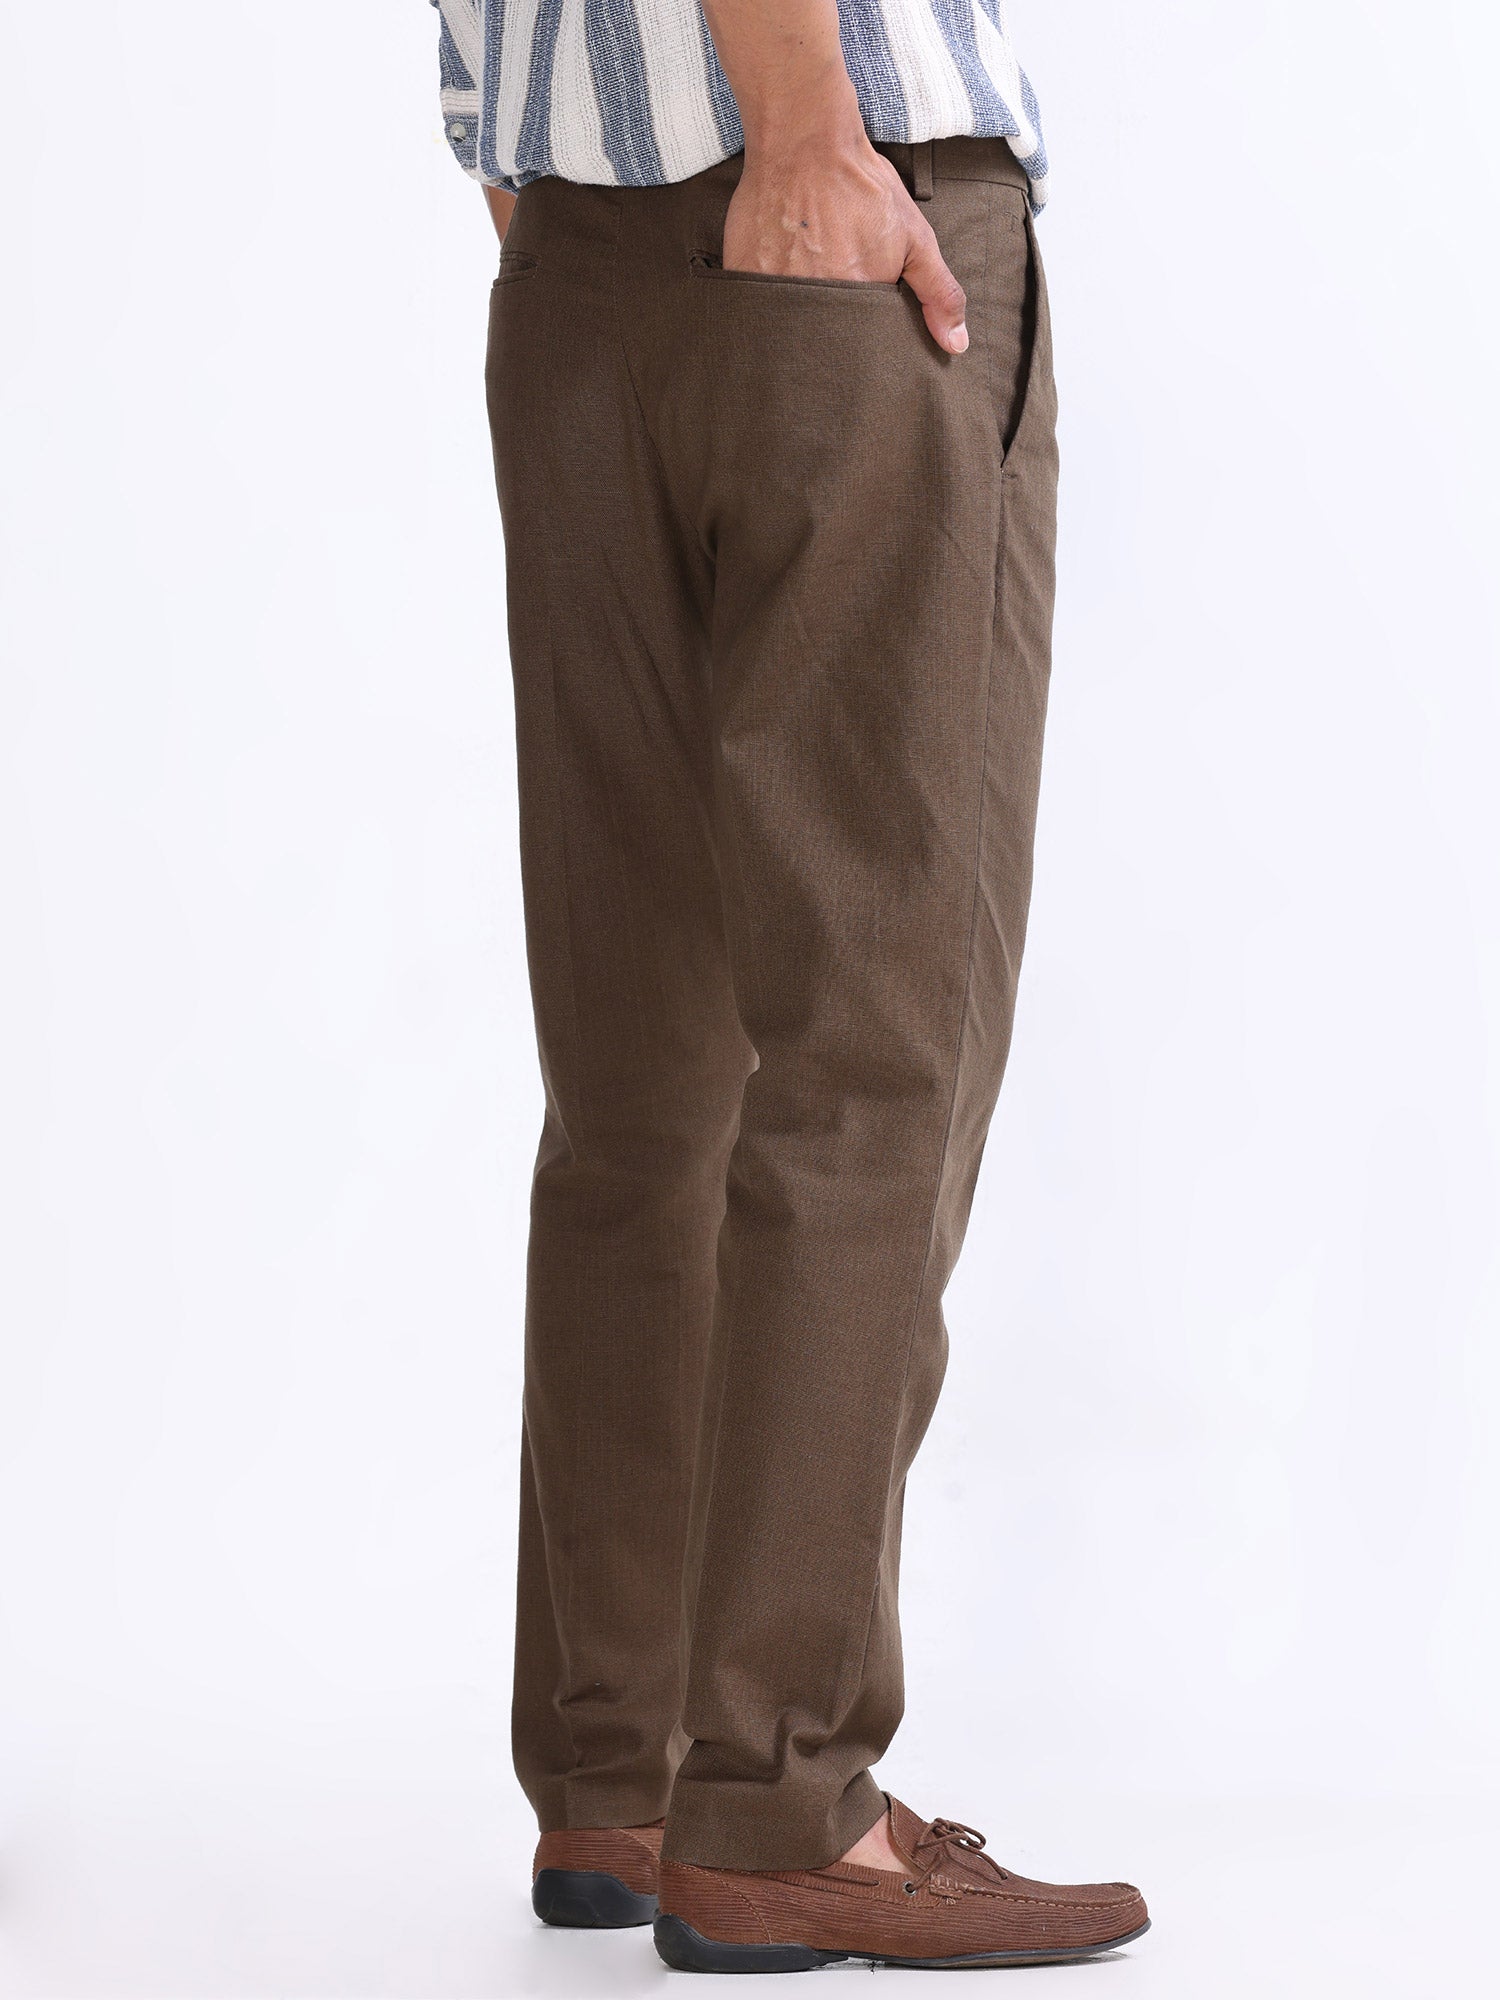 Buy Wood Brown Chinos for Men Online in India at Beyoung